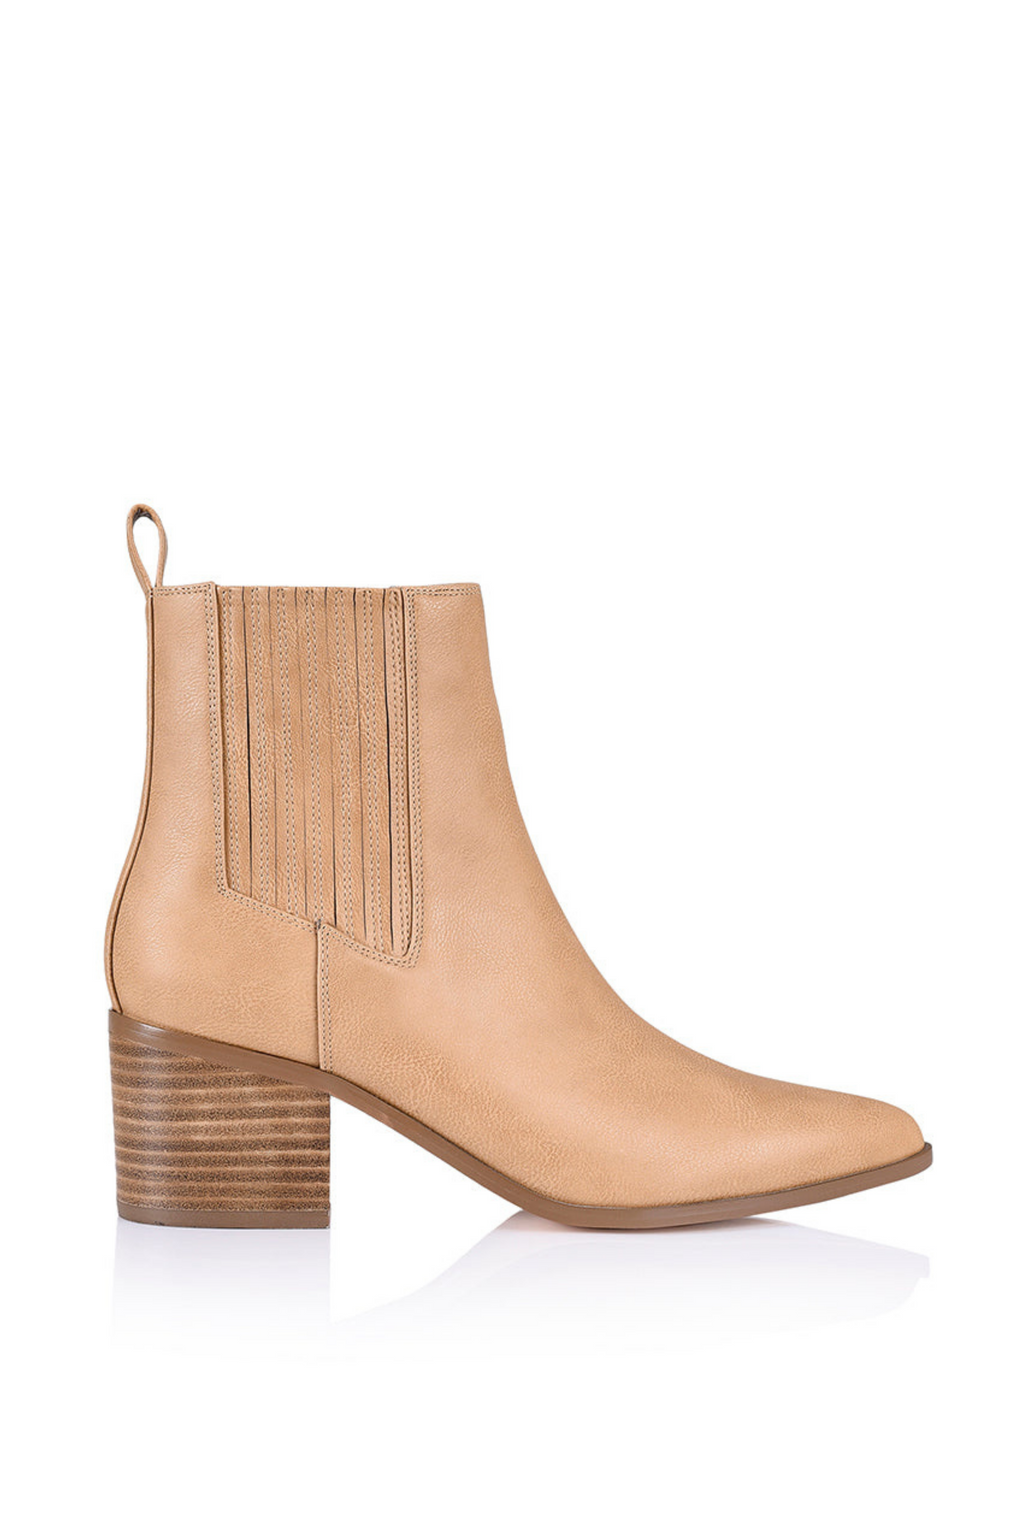 FILLIPINA CHELSEA ANKLE BOOT- Caramel